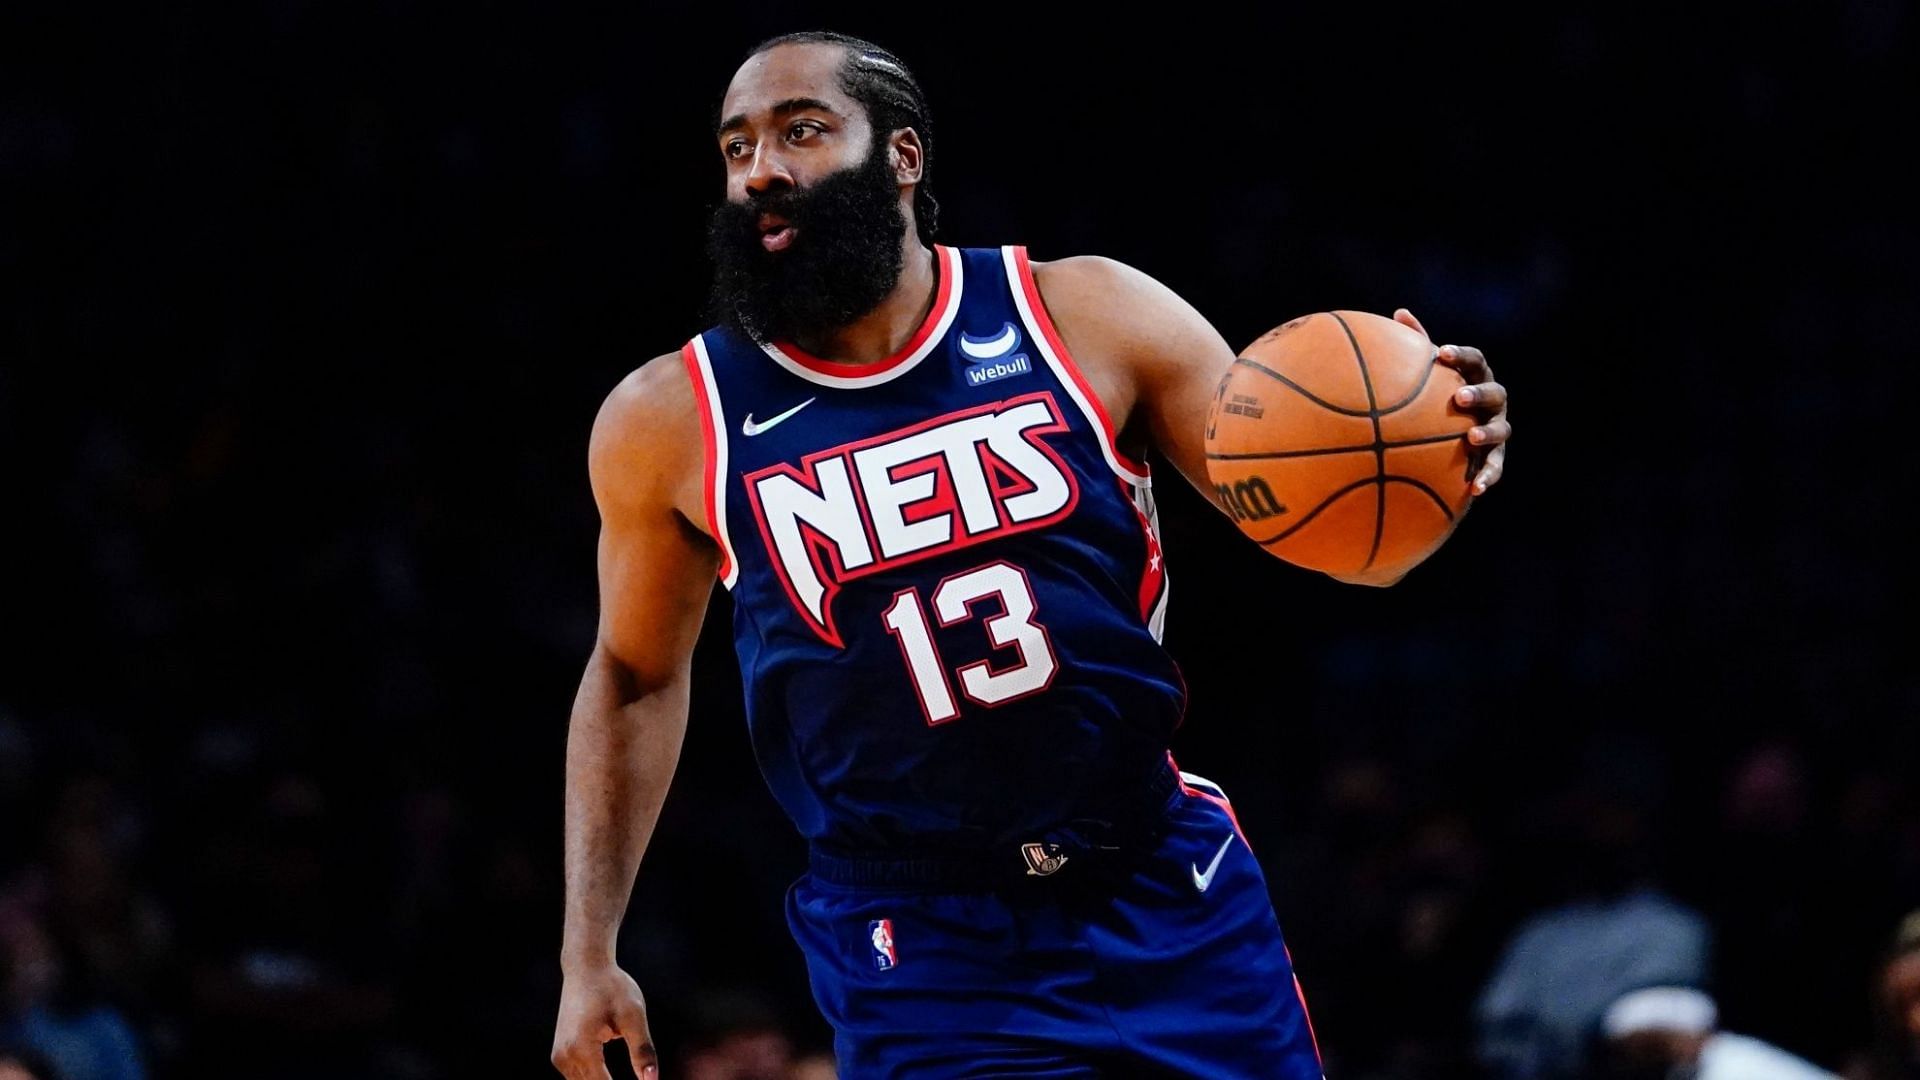 The Brooklyn Nets will lean on James Harden, particularly in home games. [Photo: MARCA]